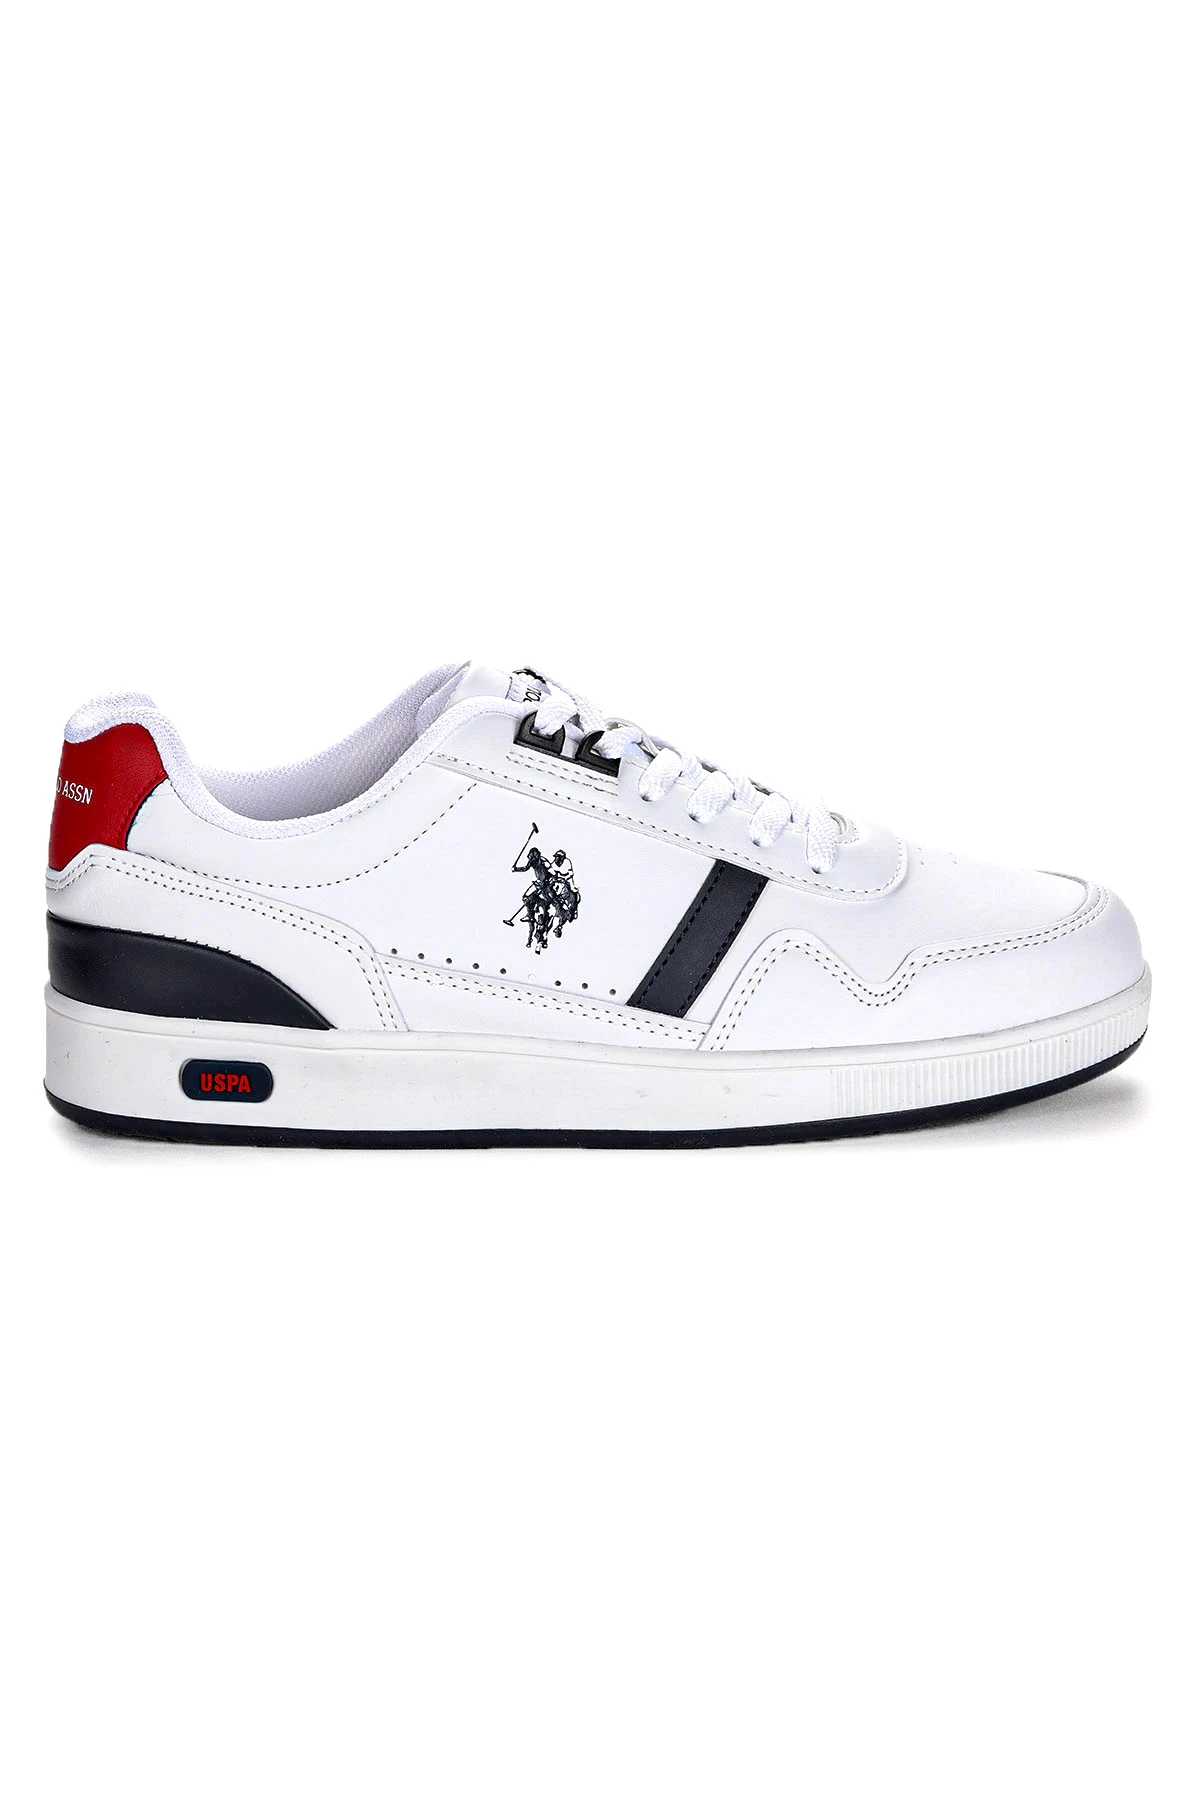 

U.S. Polo Assn Roll Daily Laces Men's Sneakers